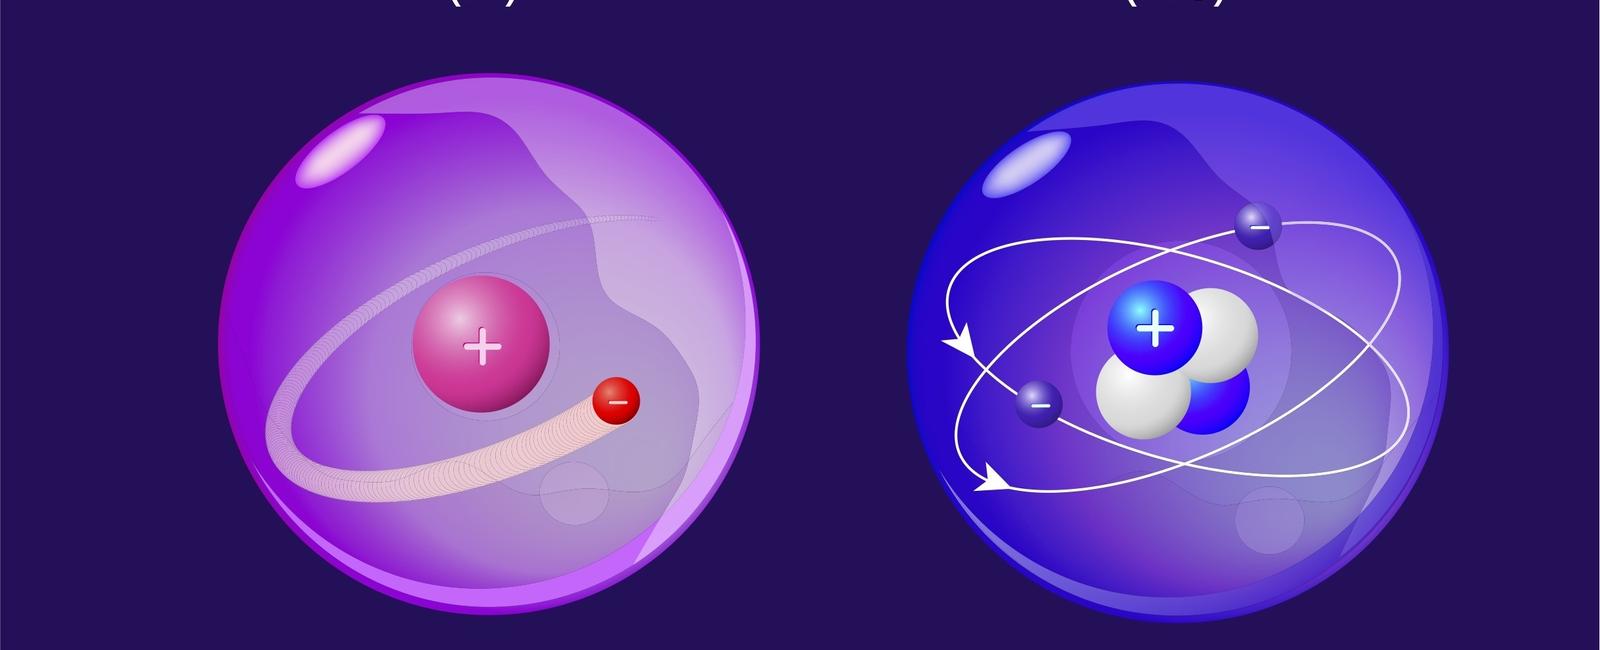 Both helium and hydrogen make up about 99 9 of the ordinary matter in our universe oxygen makes up only a tiny 0 05